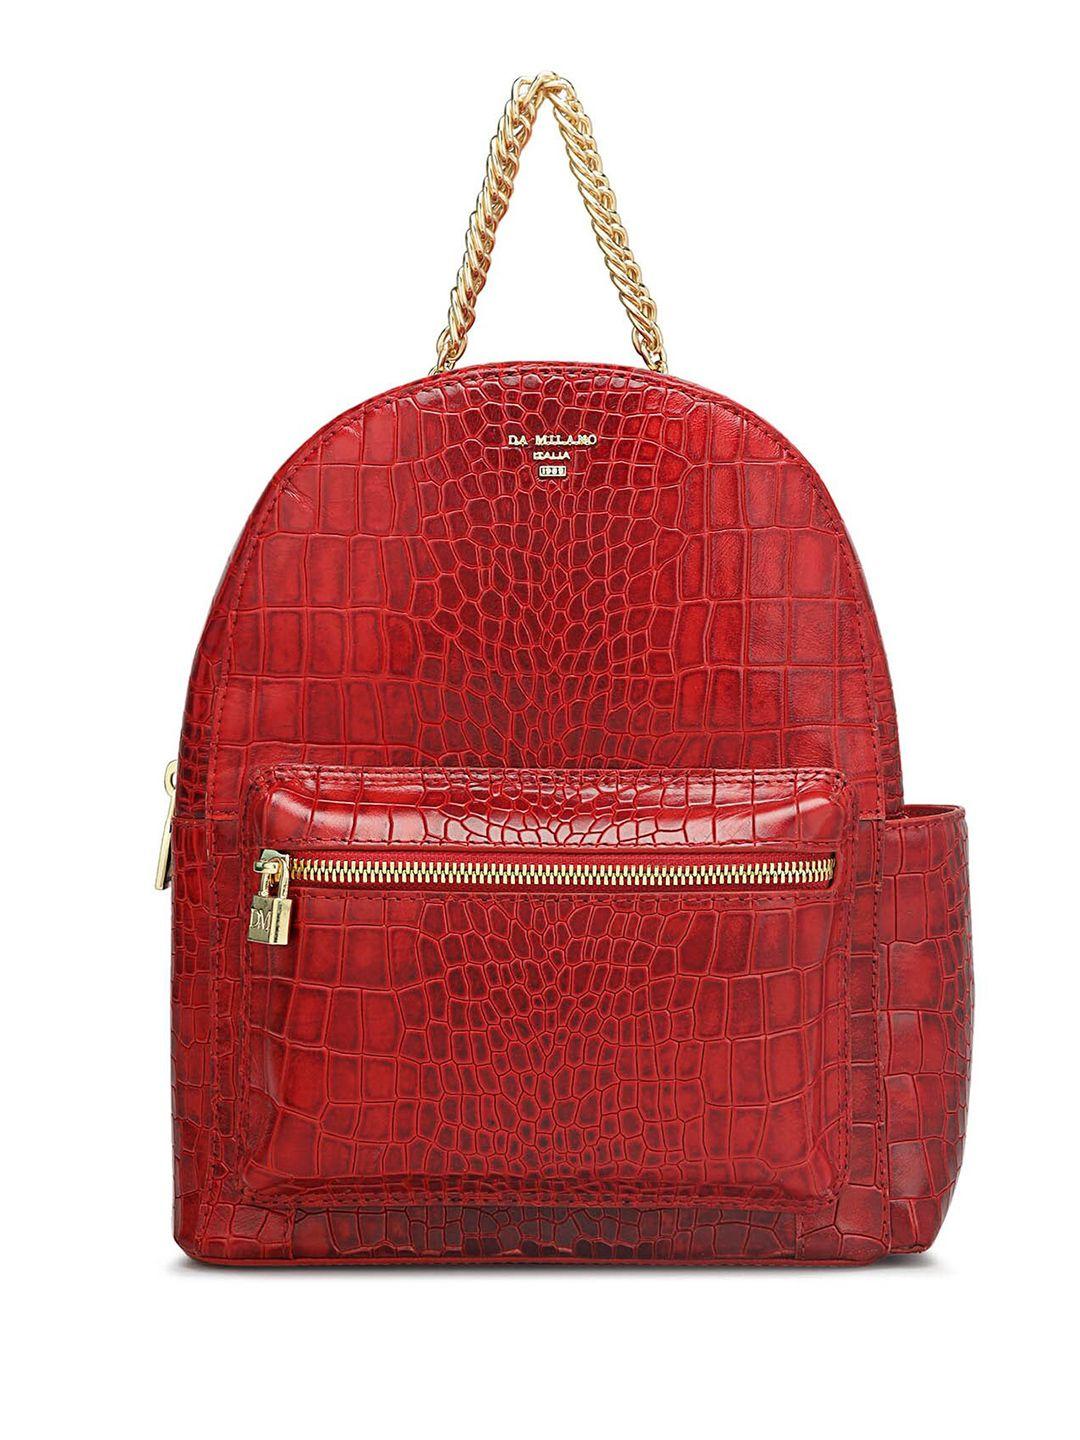 da milano textured leather backpack